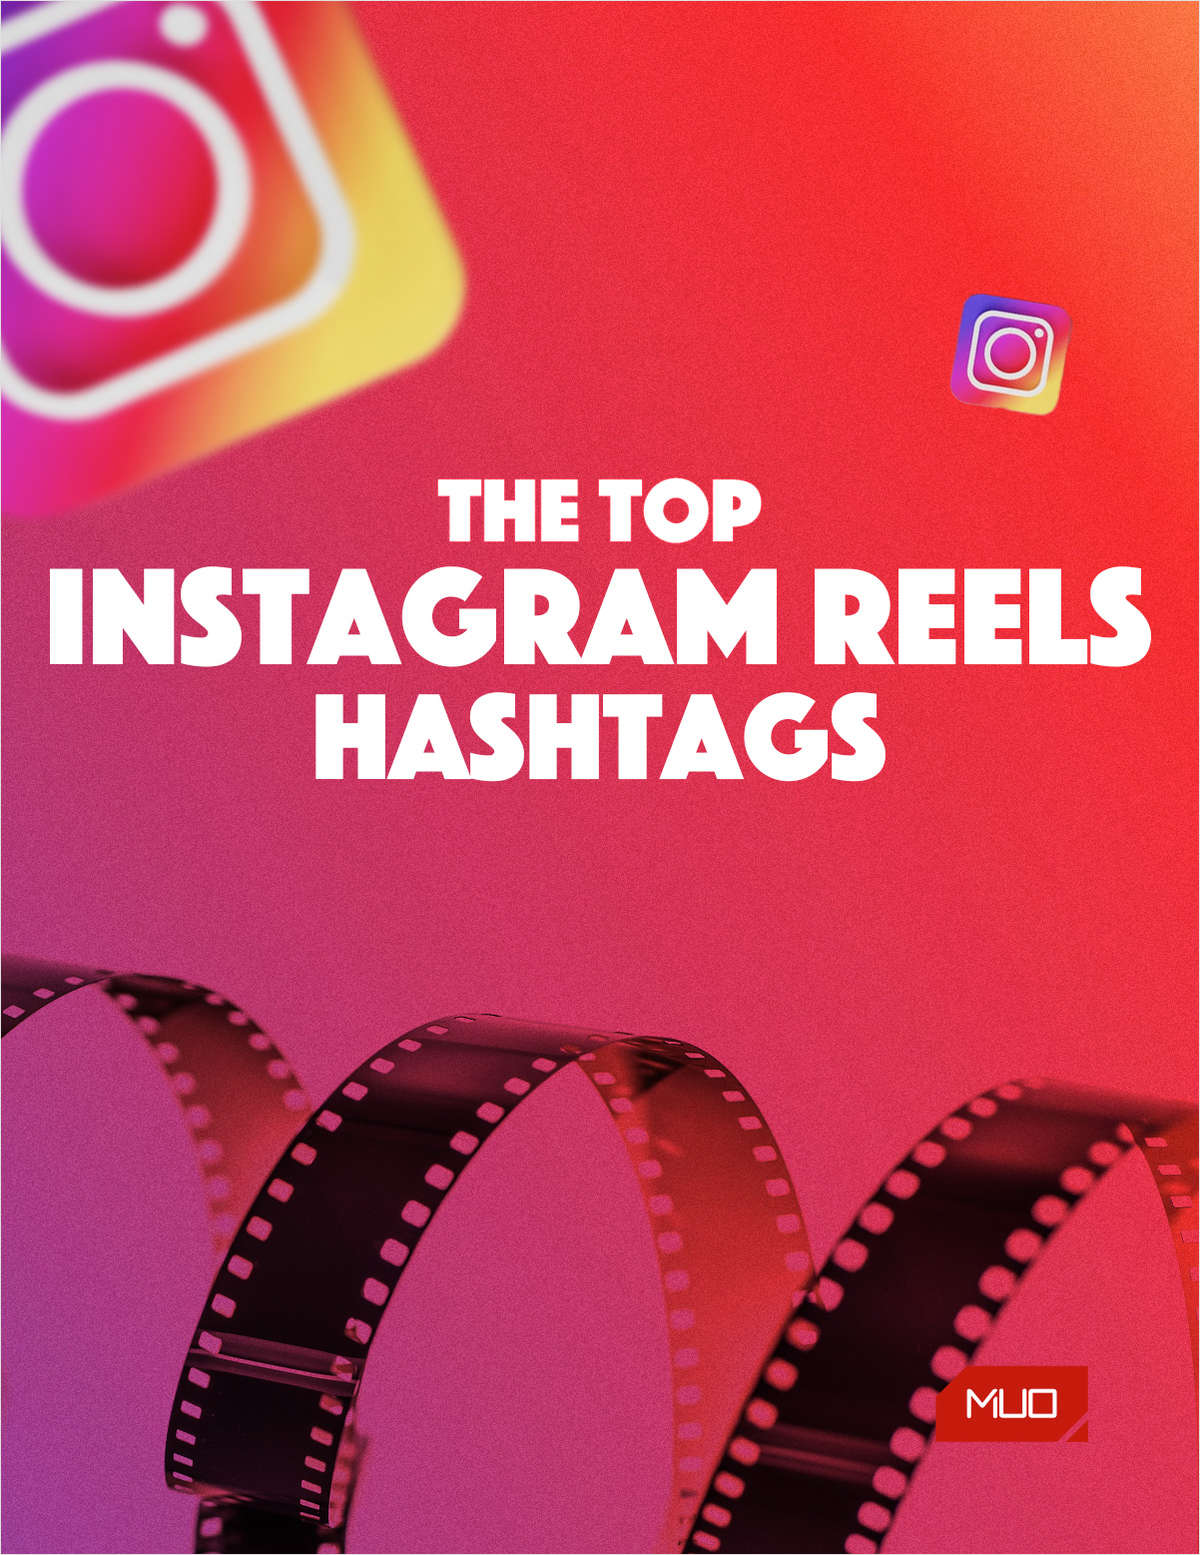 160+ Top Instagram Reels Hashtags to Help You Go Viral